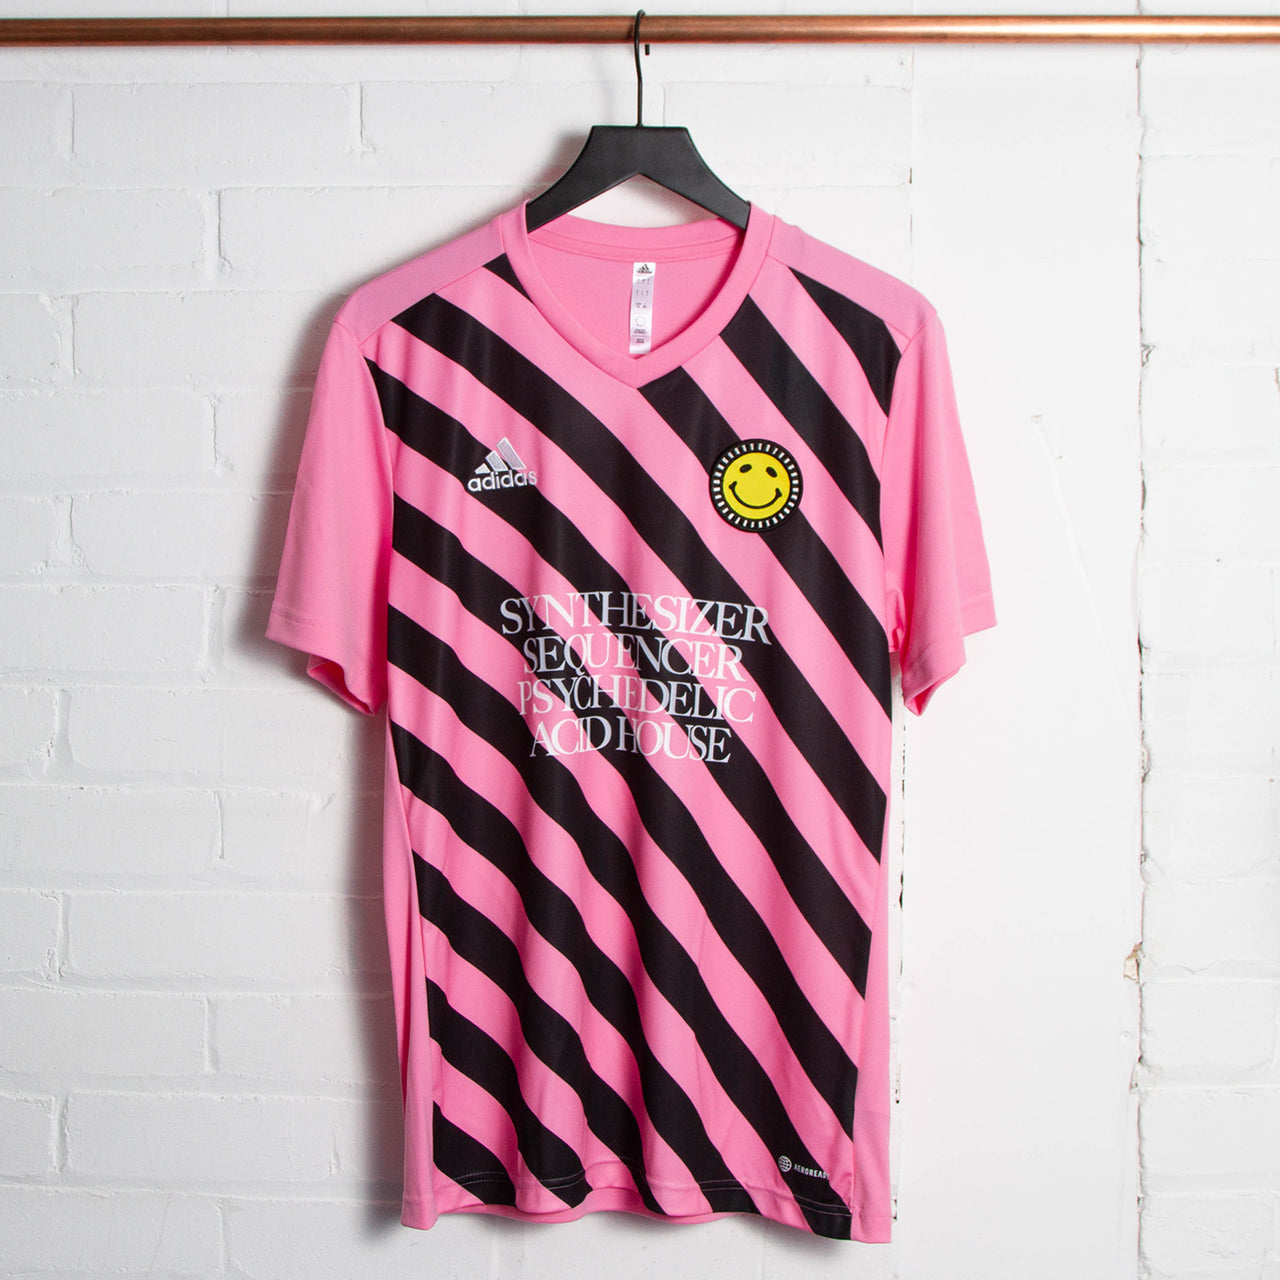 Wasted Heroes FC Entrada 22 - Training Jersey - Striped Pink Glow Smiley